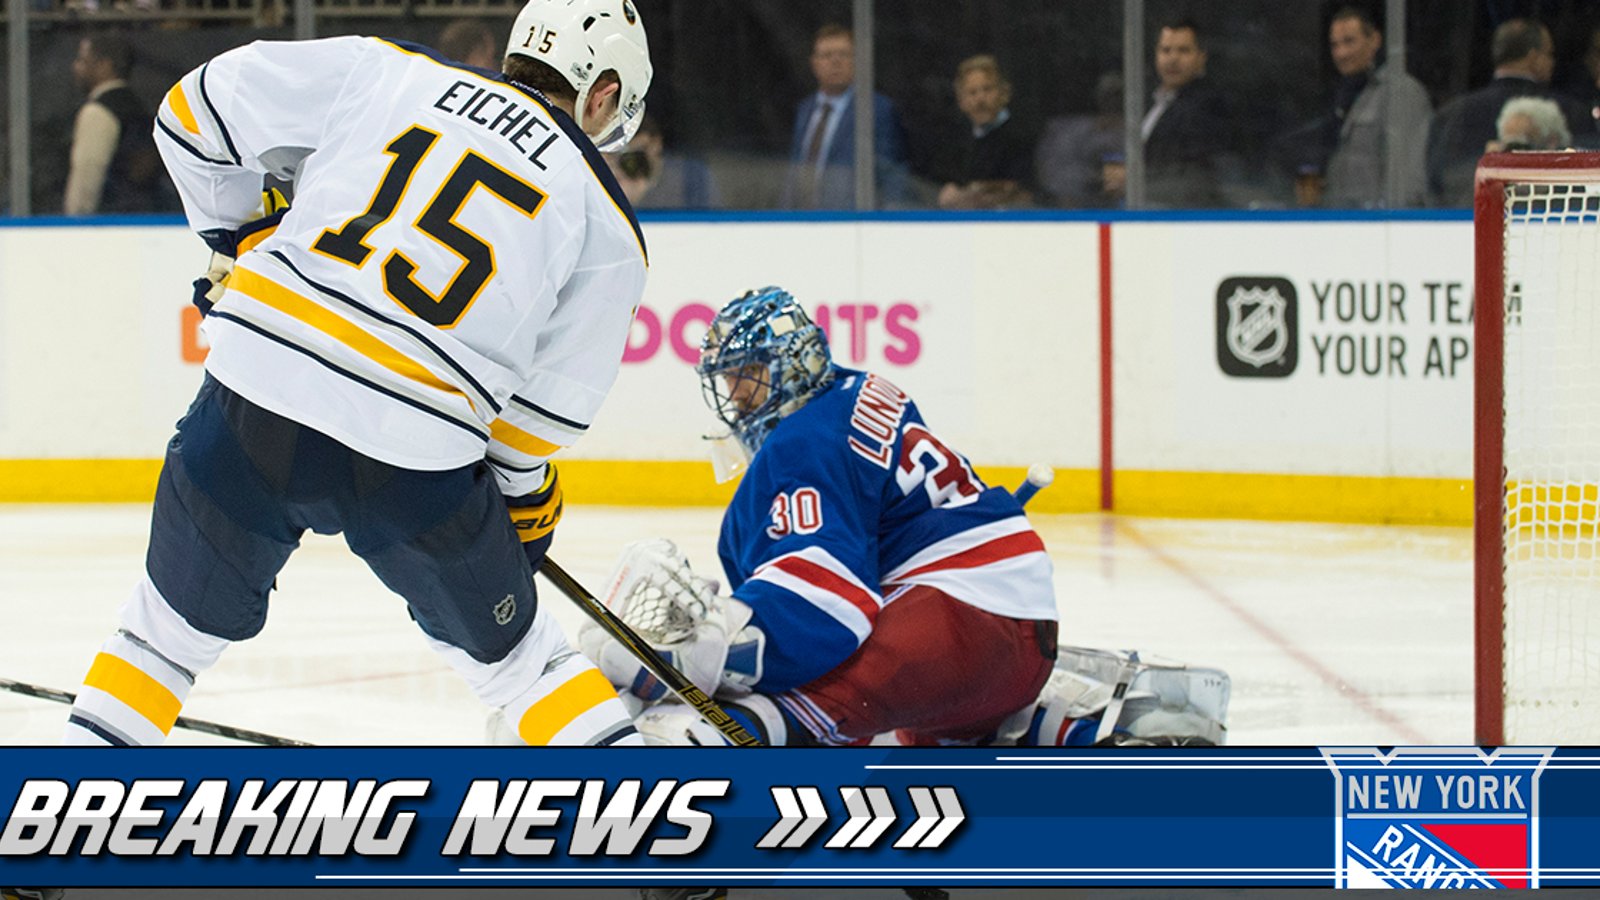 Report: NHL makes MAJOR announcement regarding the Rangers and Sabres